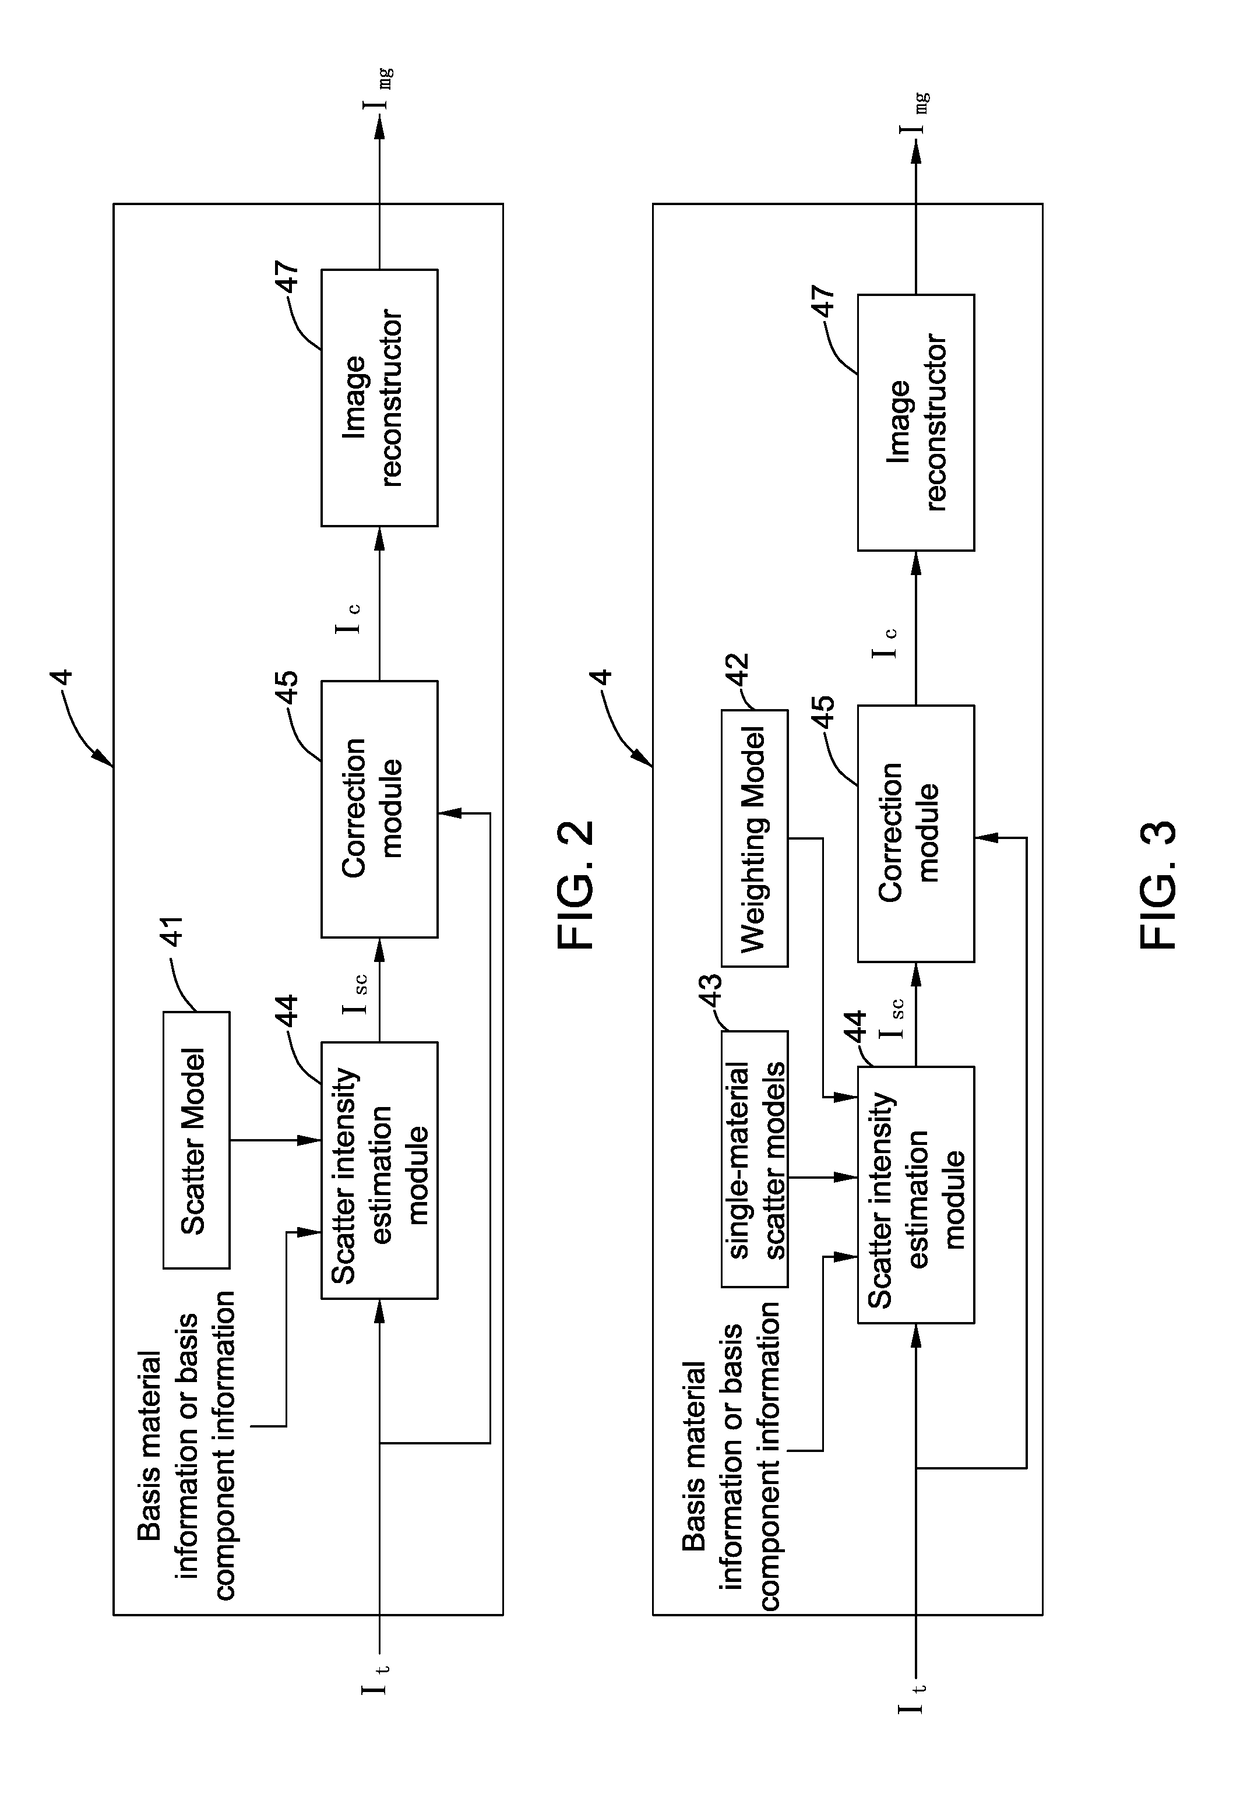 Signal processing method and imaging system for scatter correction in computed tomography